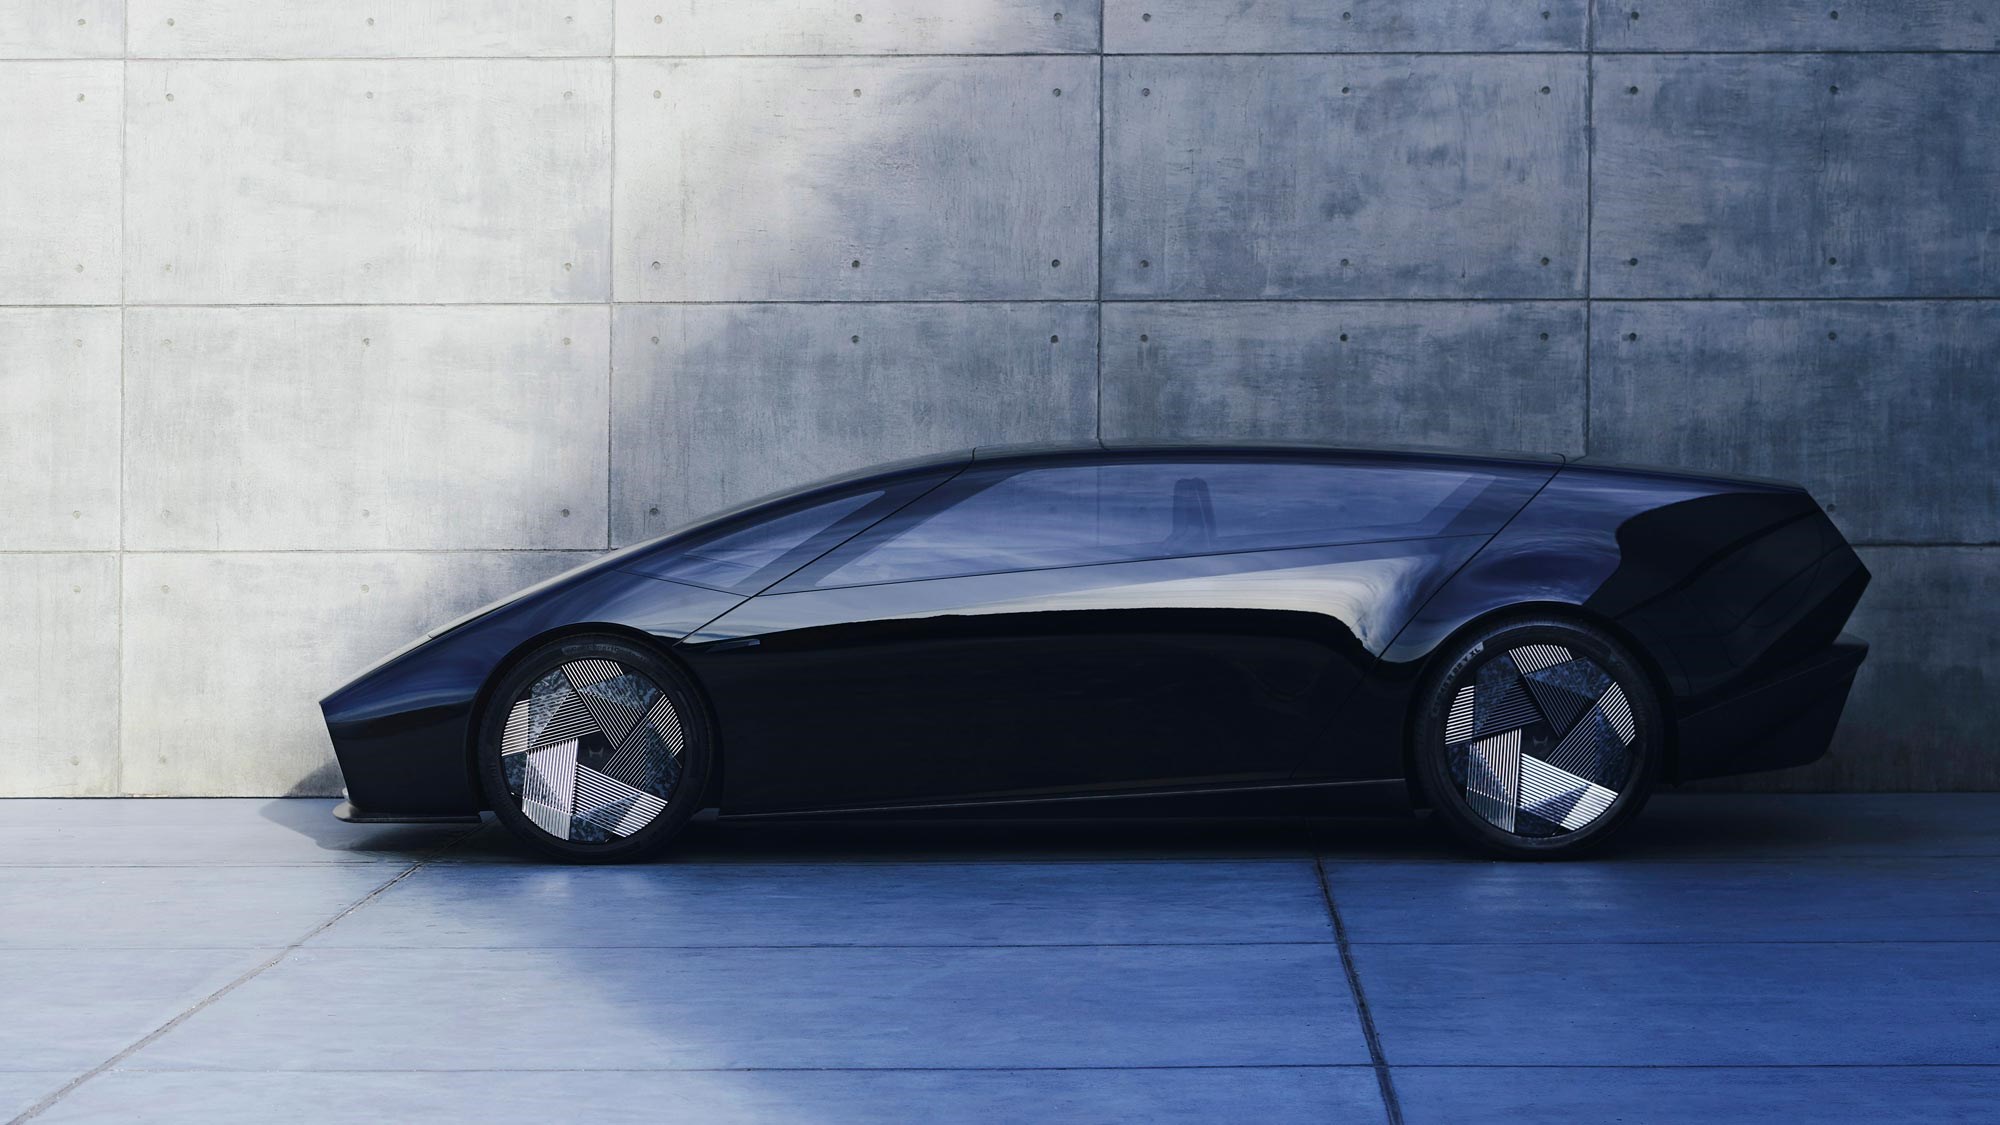 In 2040, You May Drive a Car That Looks Like This